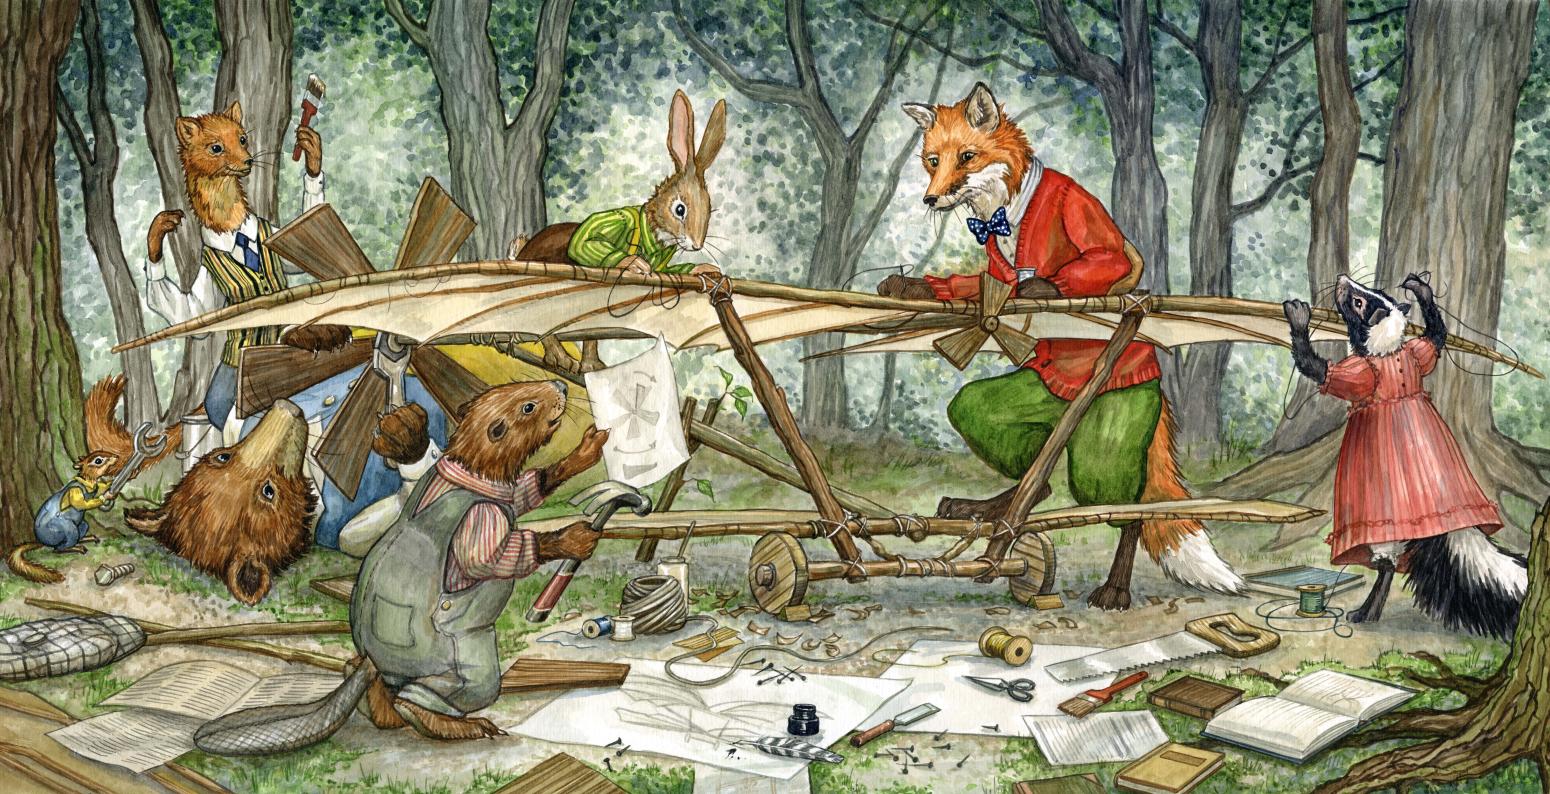 Hector Fox and his animal friends work together in the forest building a flying machine.